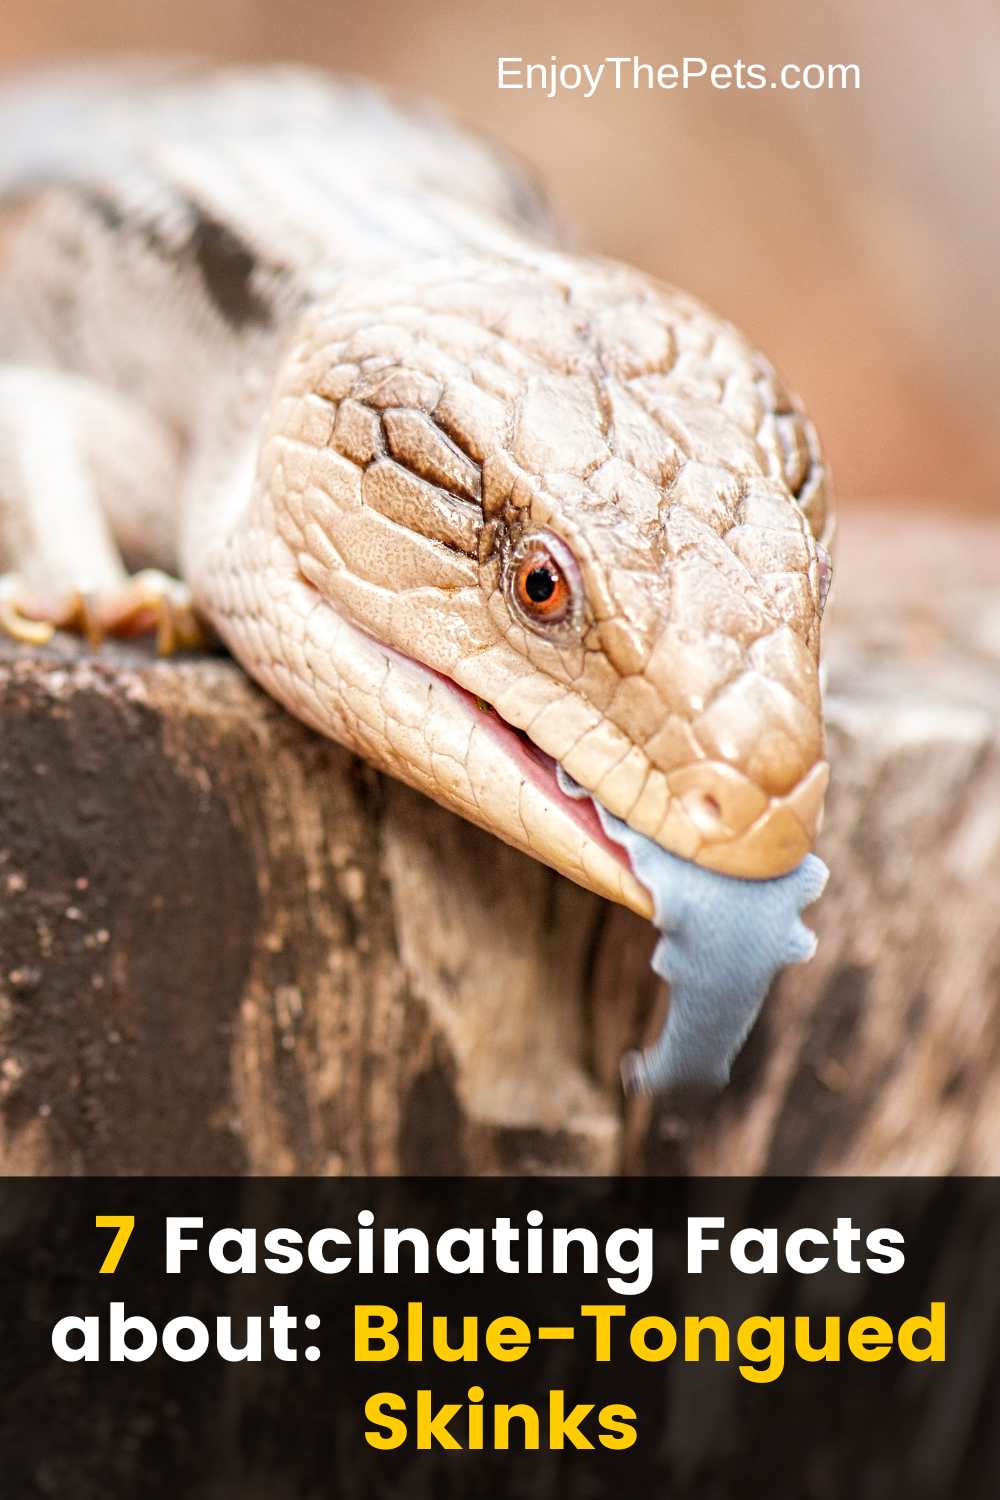 7 Fascinating Facts About Blue-Tongued Skinks